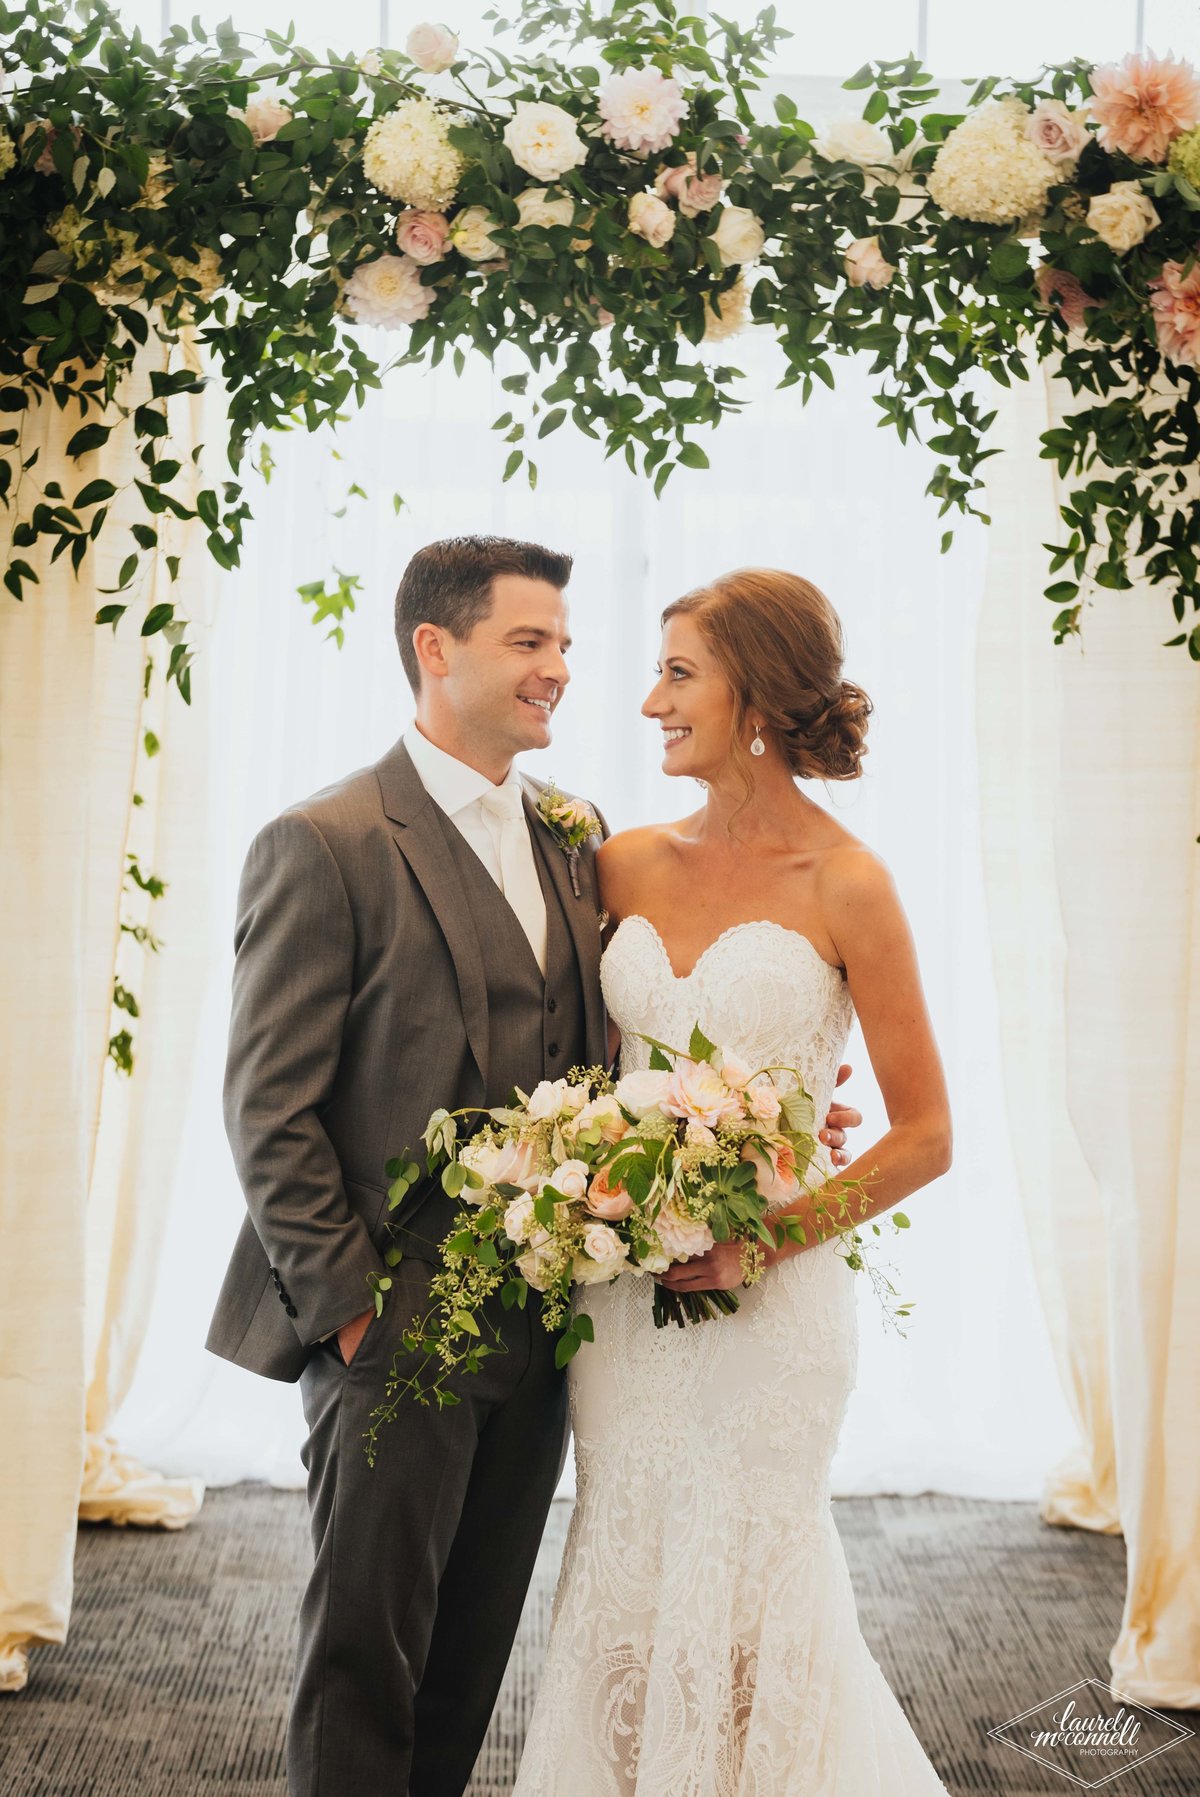 wedding couple standing underneath greenery chuppah, and bride holding garden flower bouquet